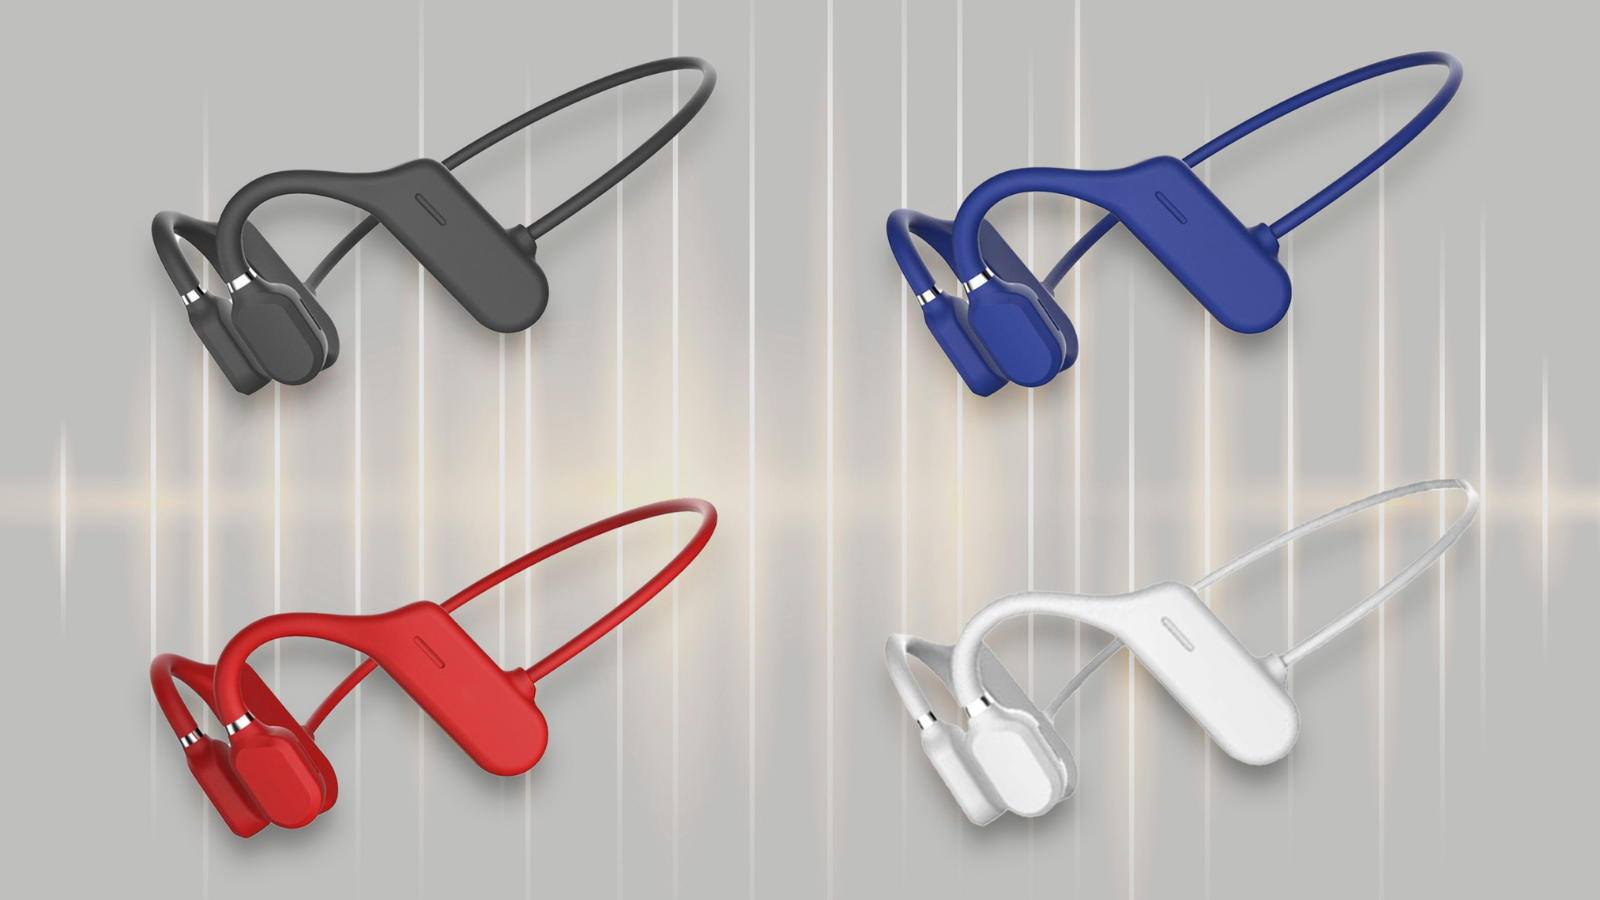 open-ear conduction headphones in multiple colors against a gray background